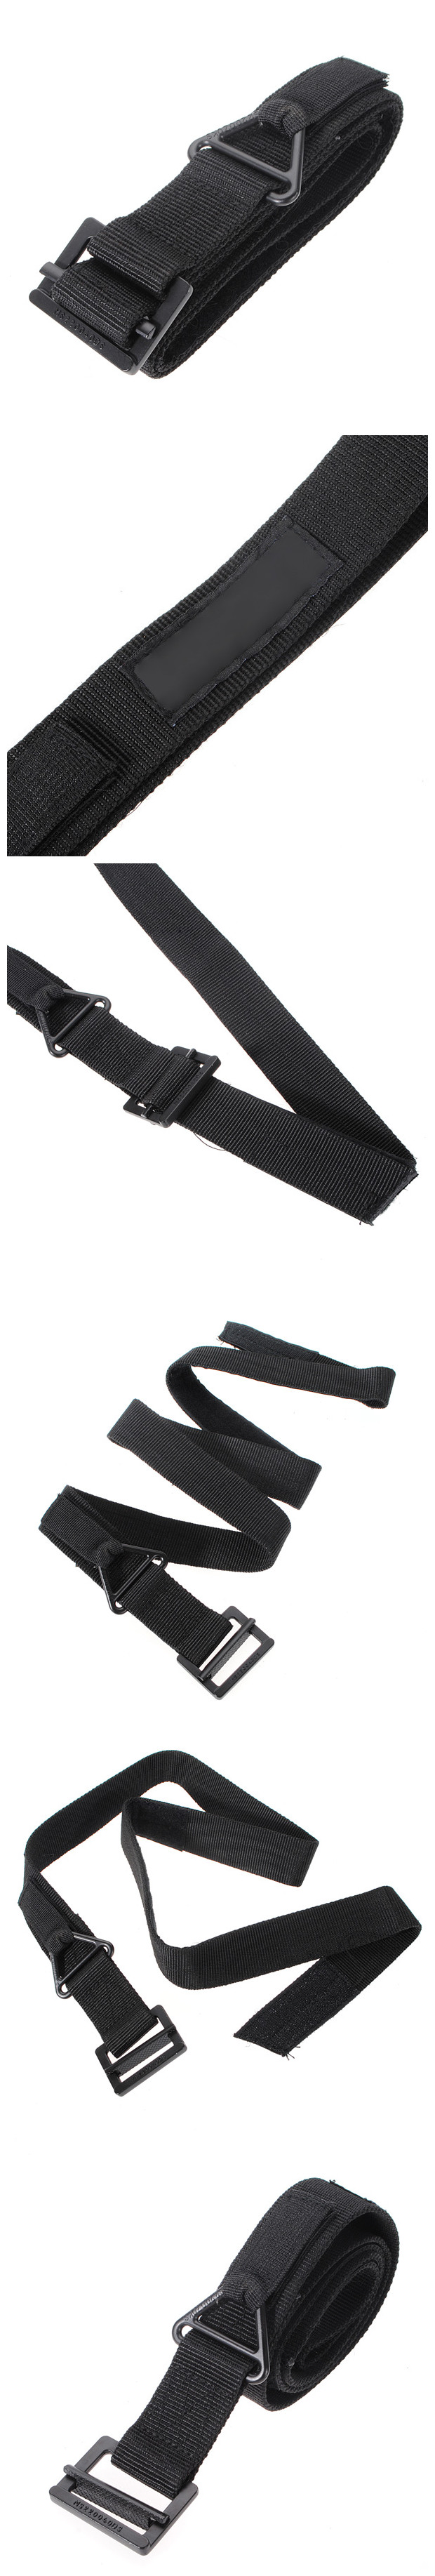 KALOAD-Survival-Tactical-Waist-Belt-Strap-Military-Emergency-Rescue-Protection-Waistband-For-Hunting-62888-2